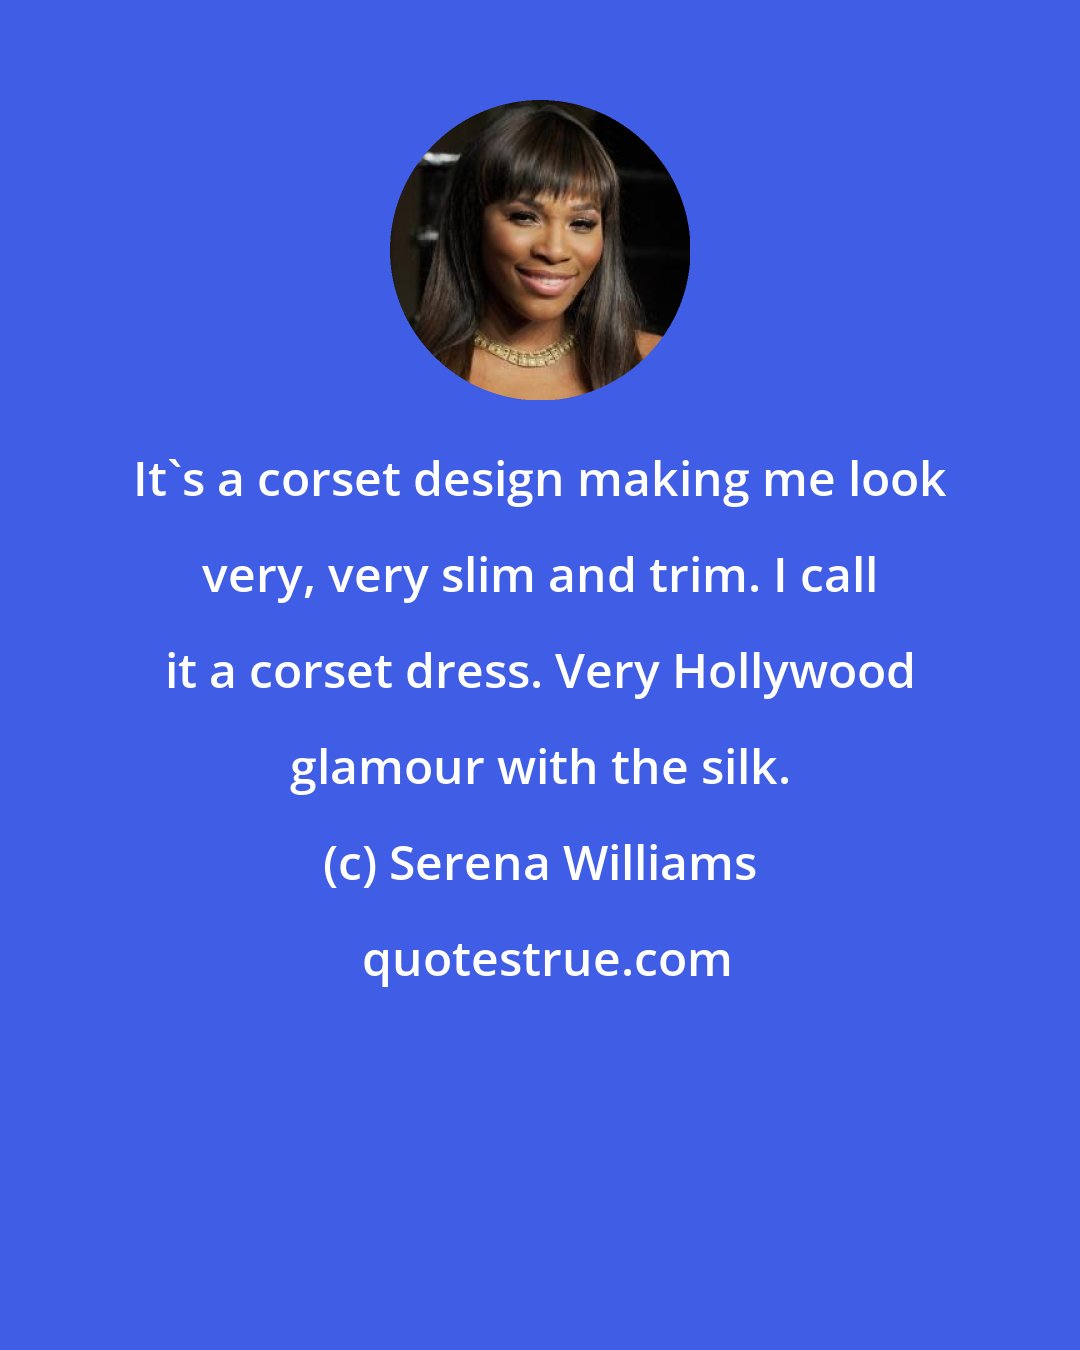 Serena Williams: It's a corset design making me look very, very slim and trim. I call it a corset dress. Very Hollywood glamour with the silk.